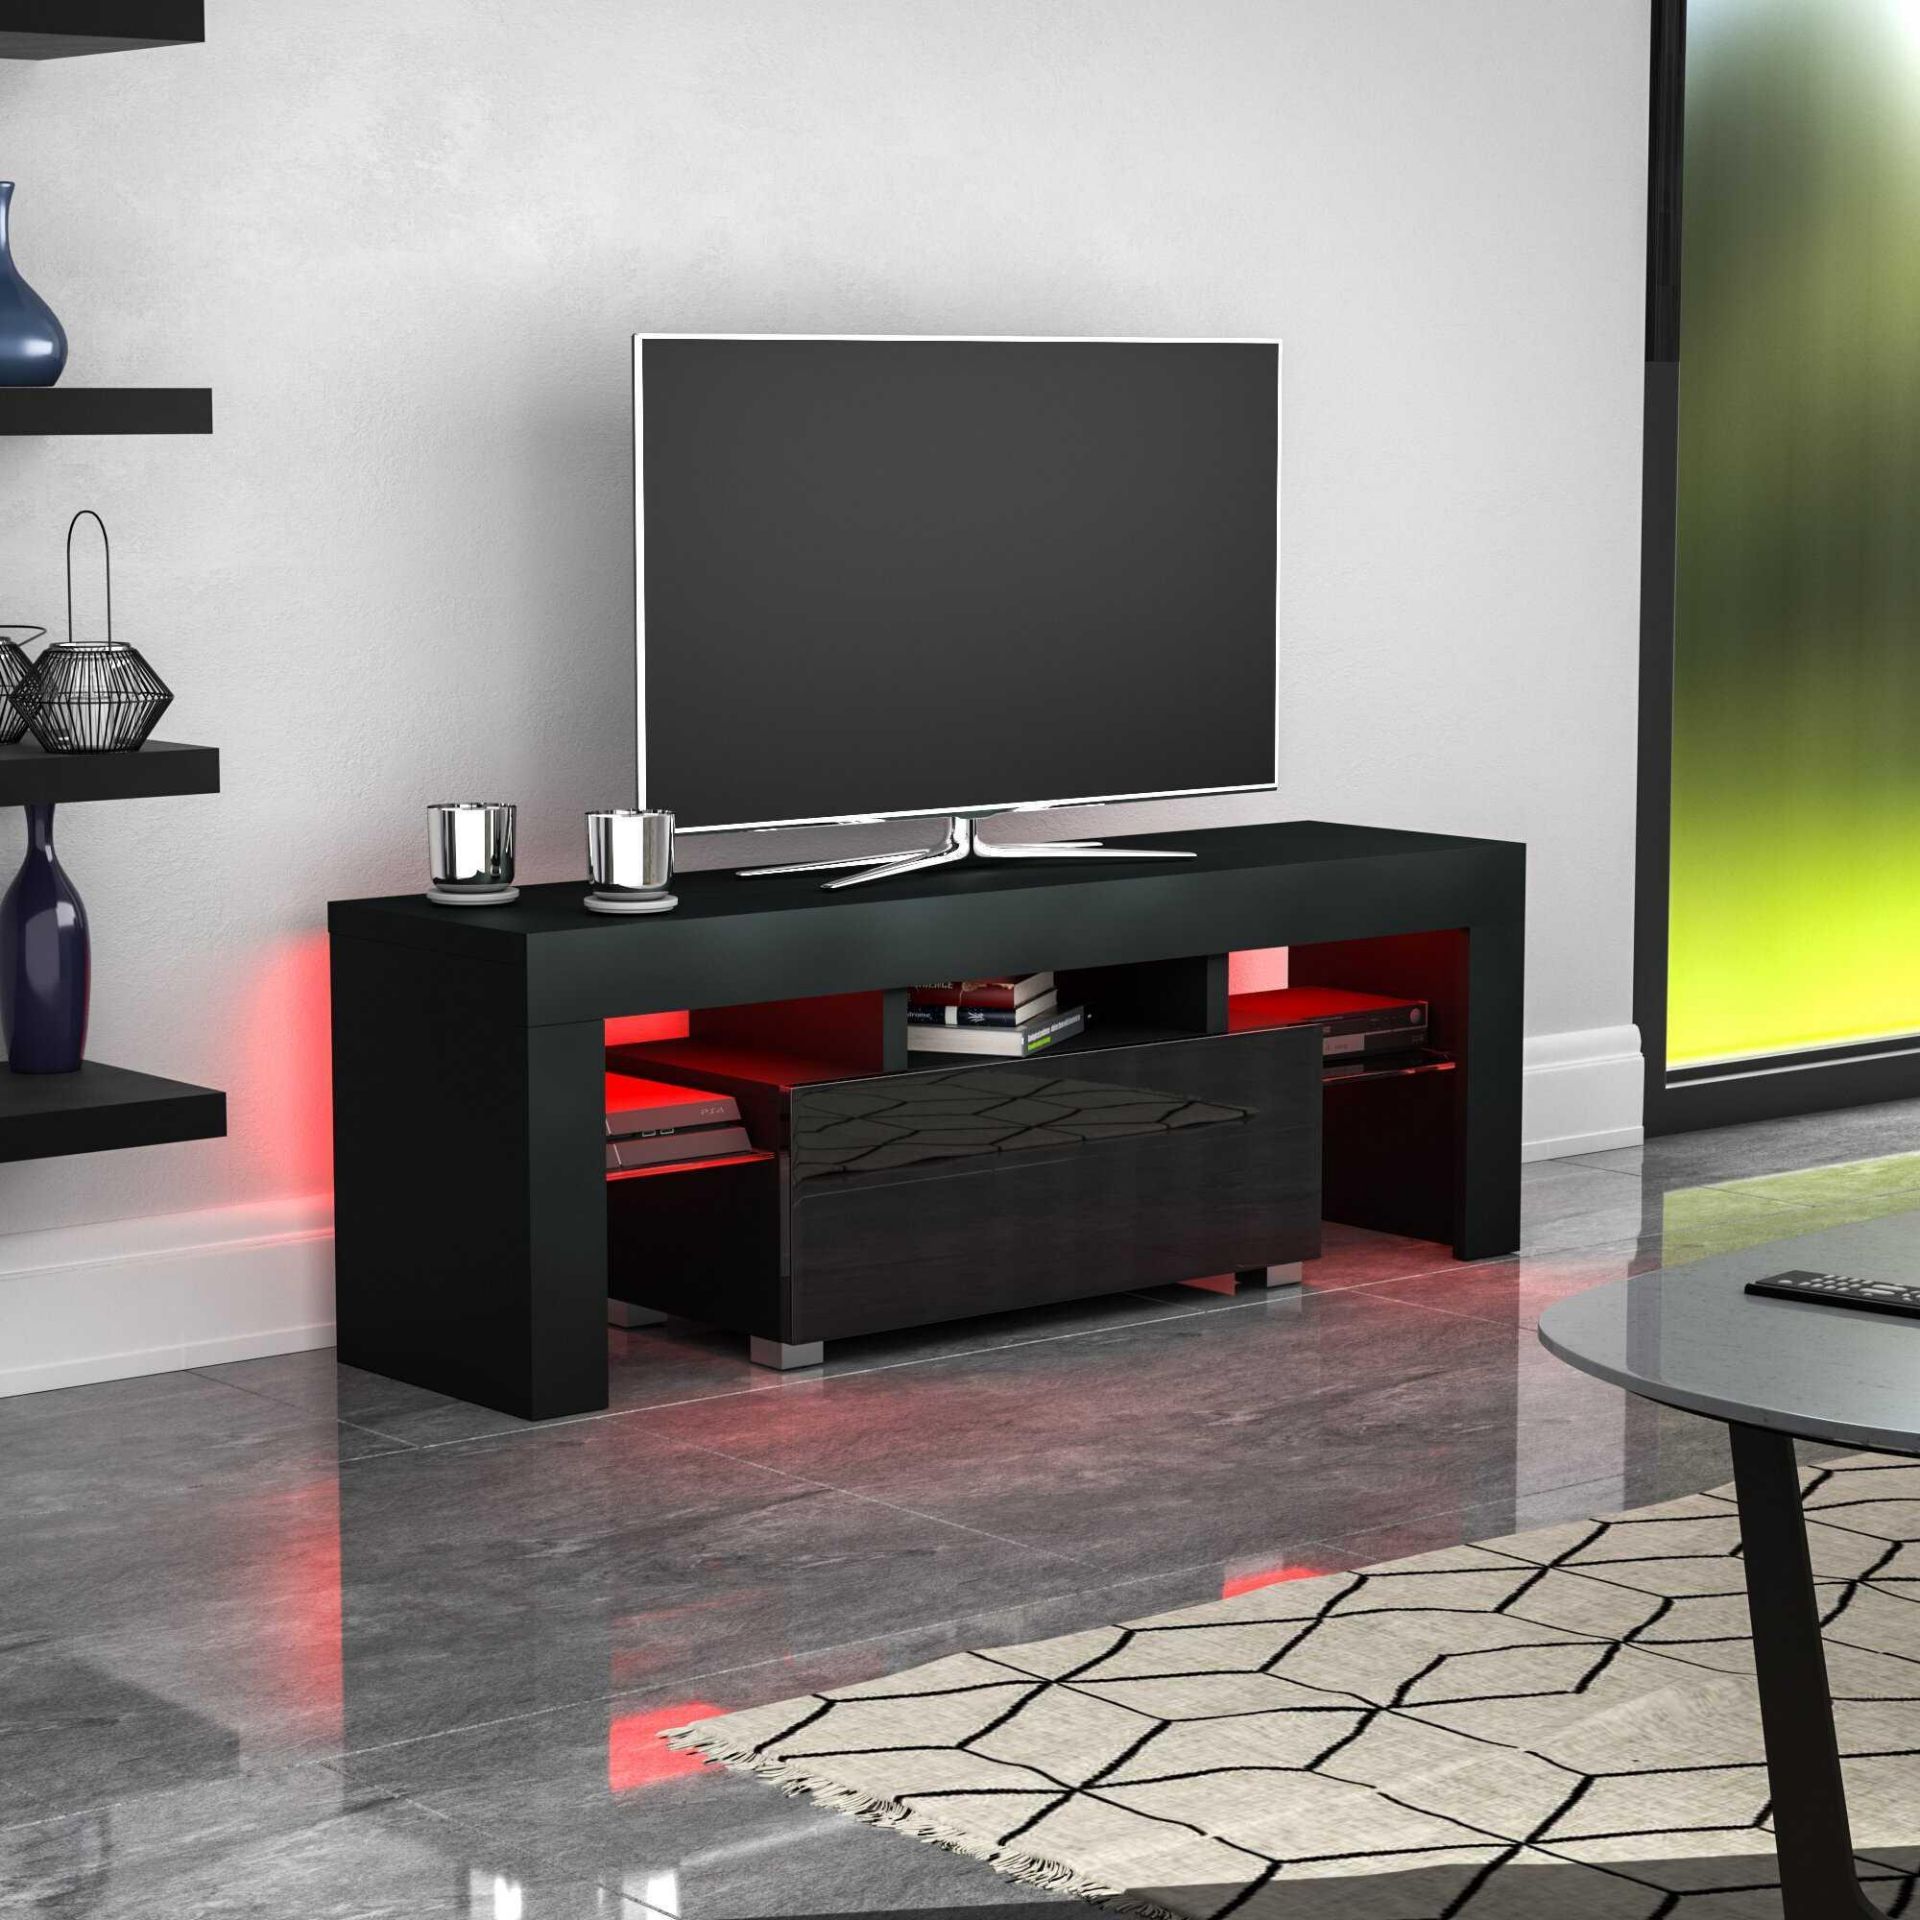 Rrp £90 50" Tv Stand